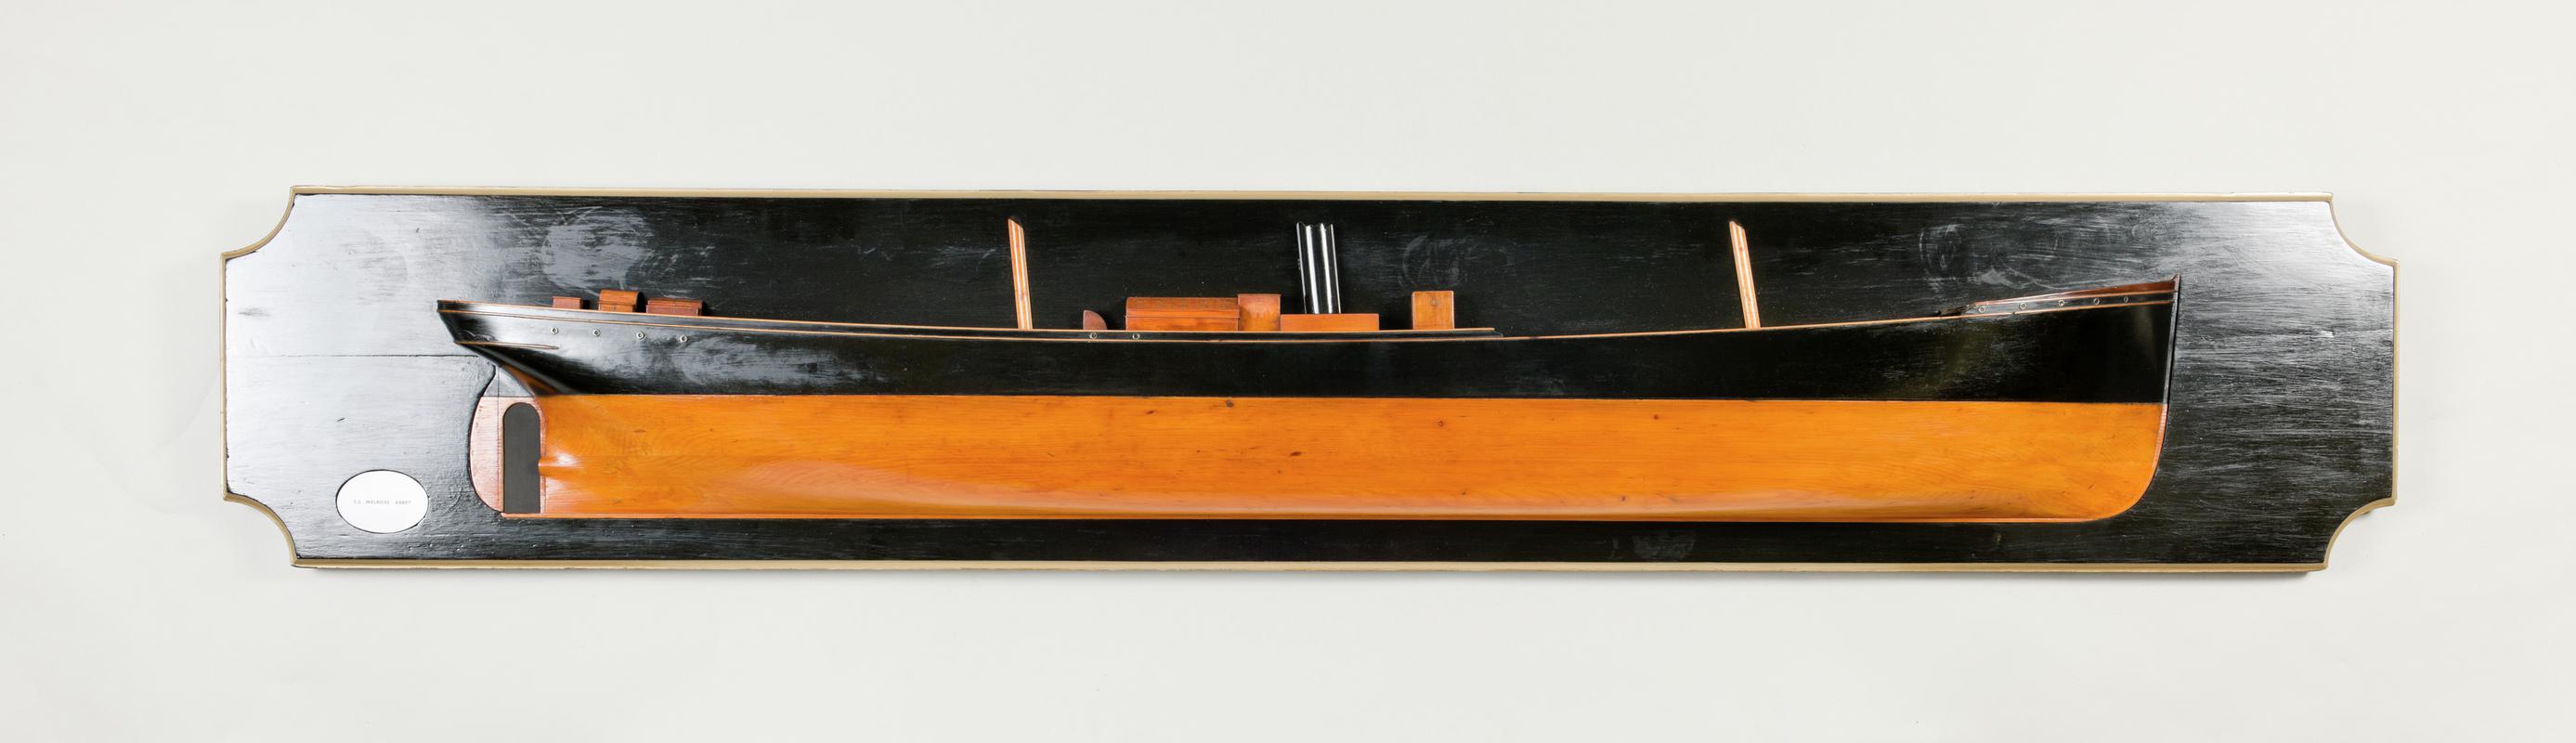 Half hull ship model of the S.S. MELROSE ABBEY